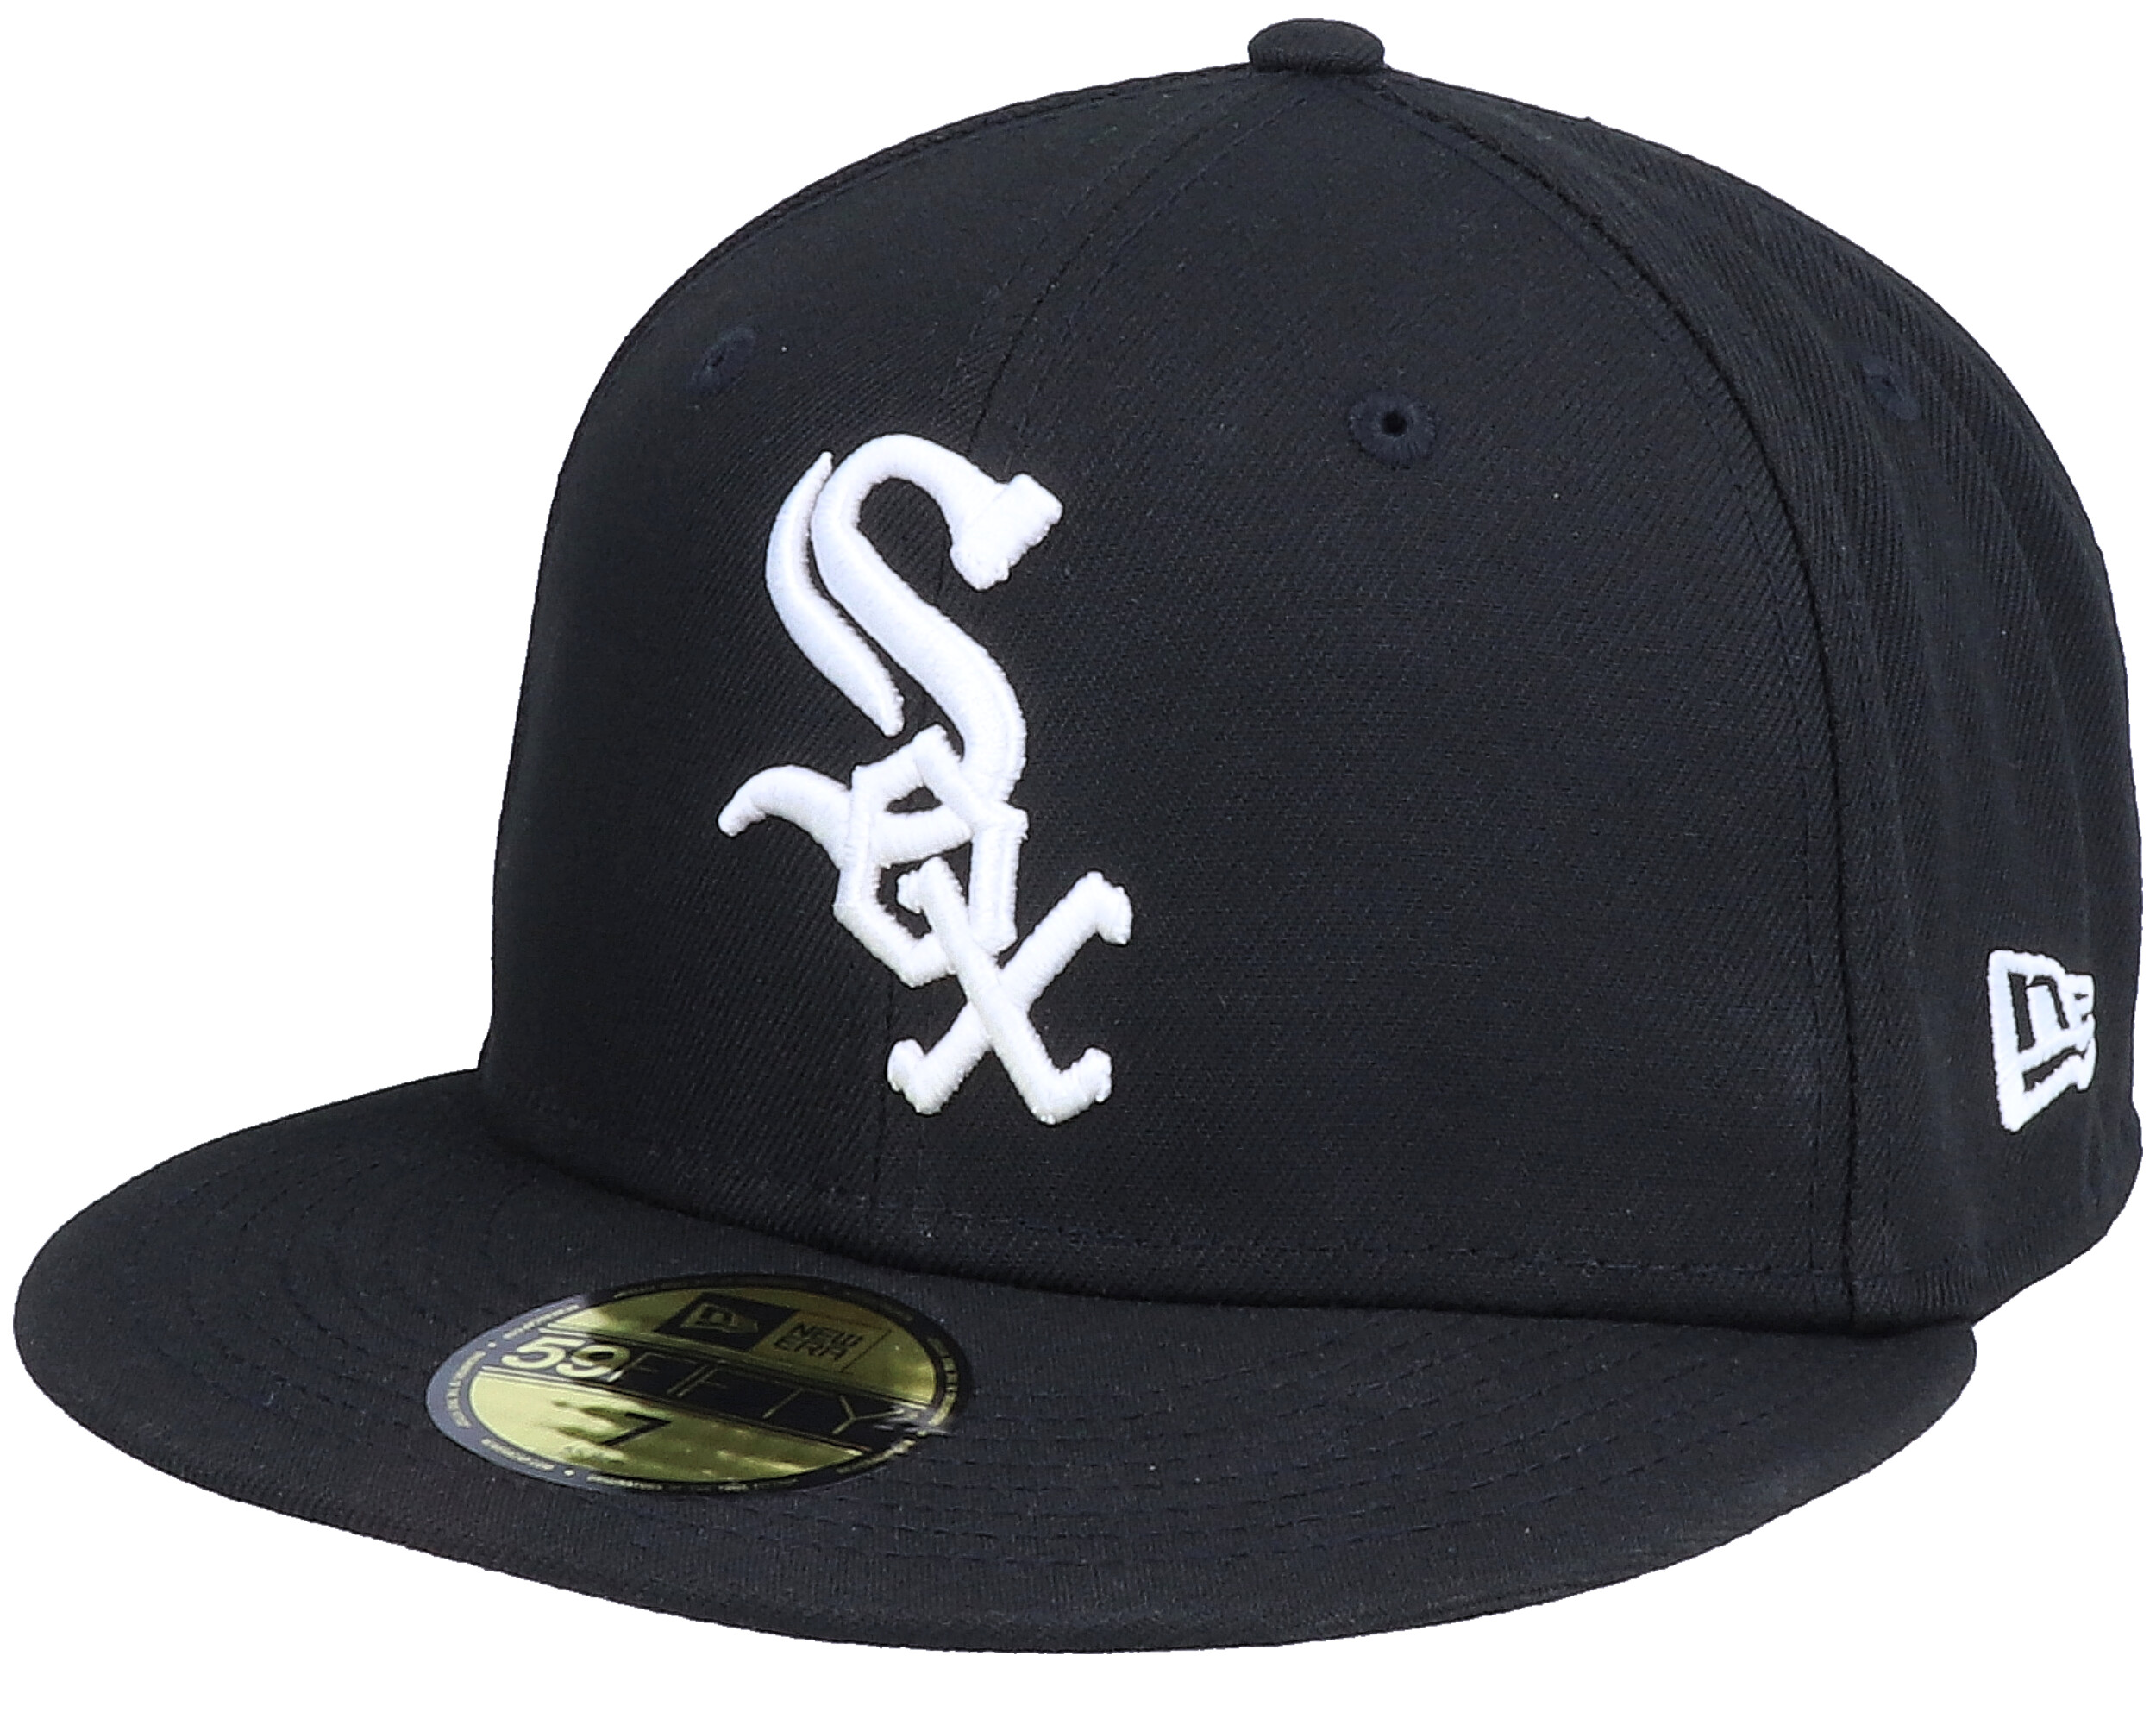 Chicago White Sox Authentic On Field 59fifty Black Fitted New Era Cap